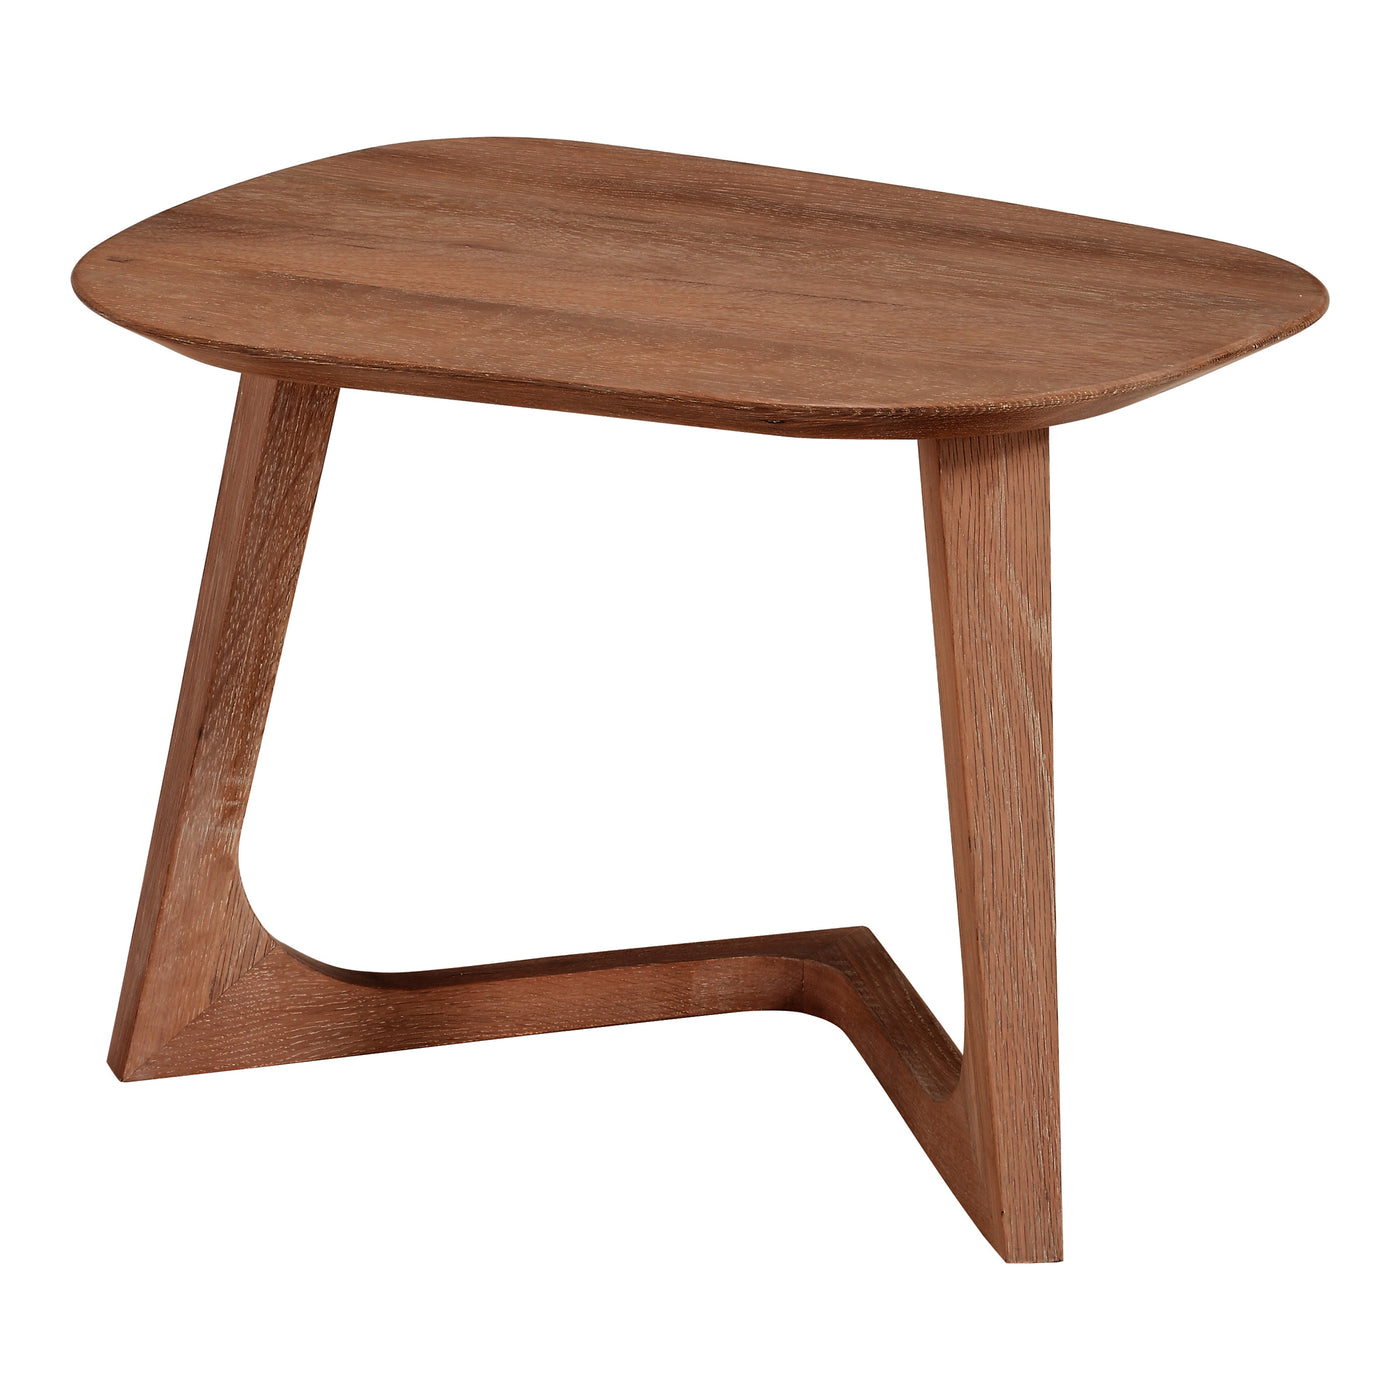 The Godenza end table is the cherry on top on a midcentury modern space. The solid walnut wood provides durability and wil...